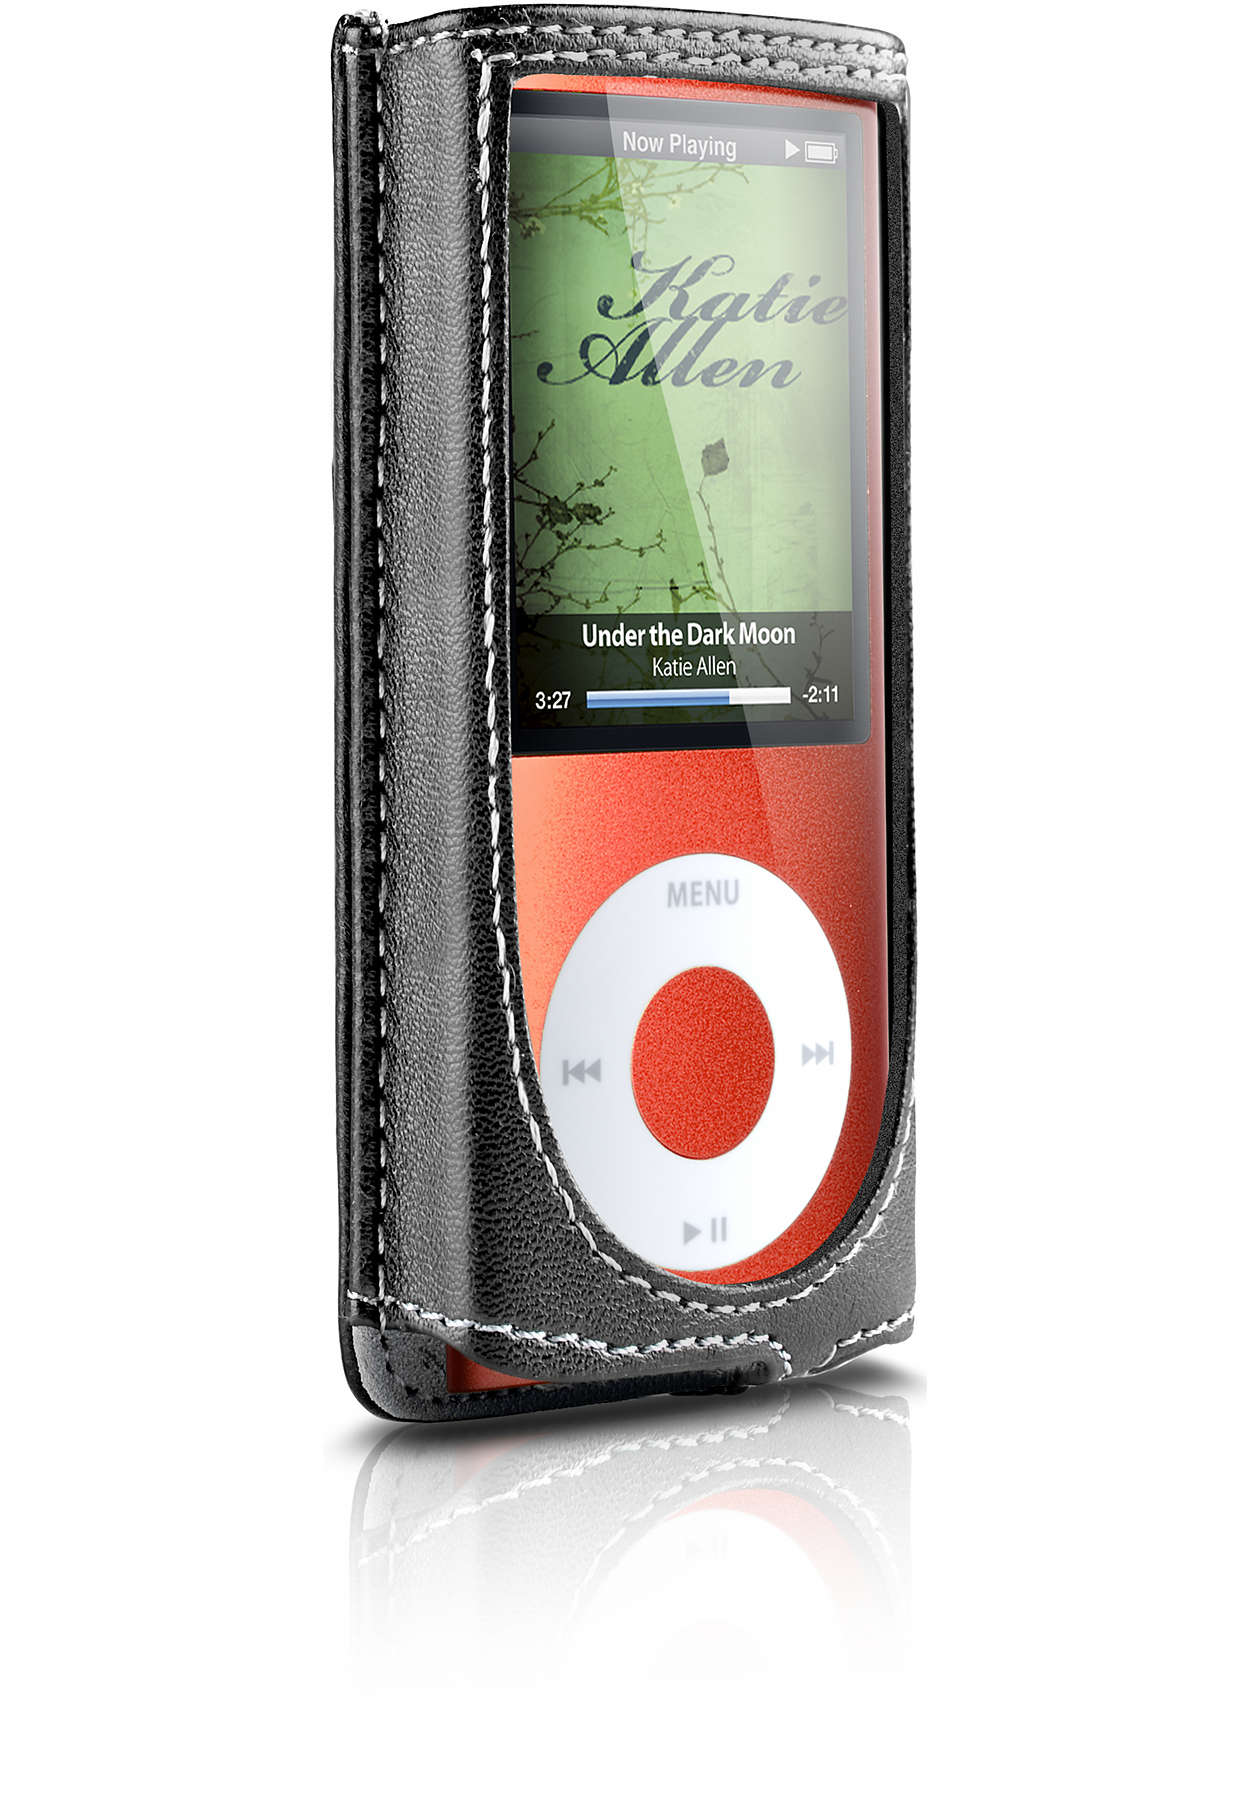 Carry your iPod in style